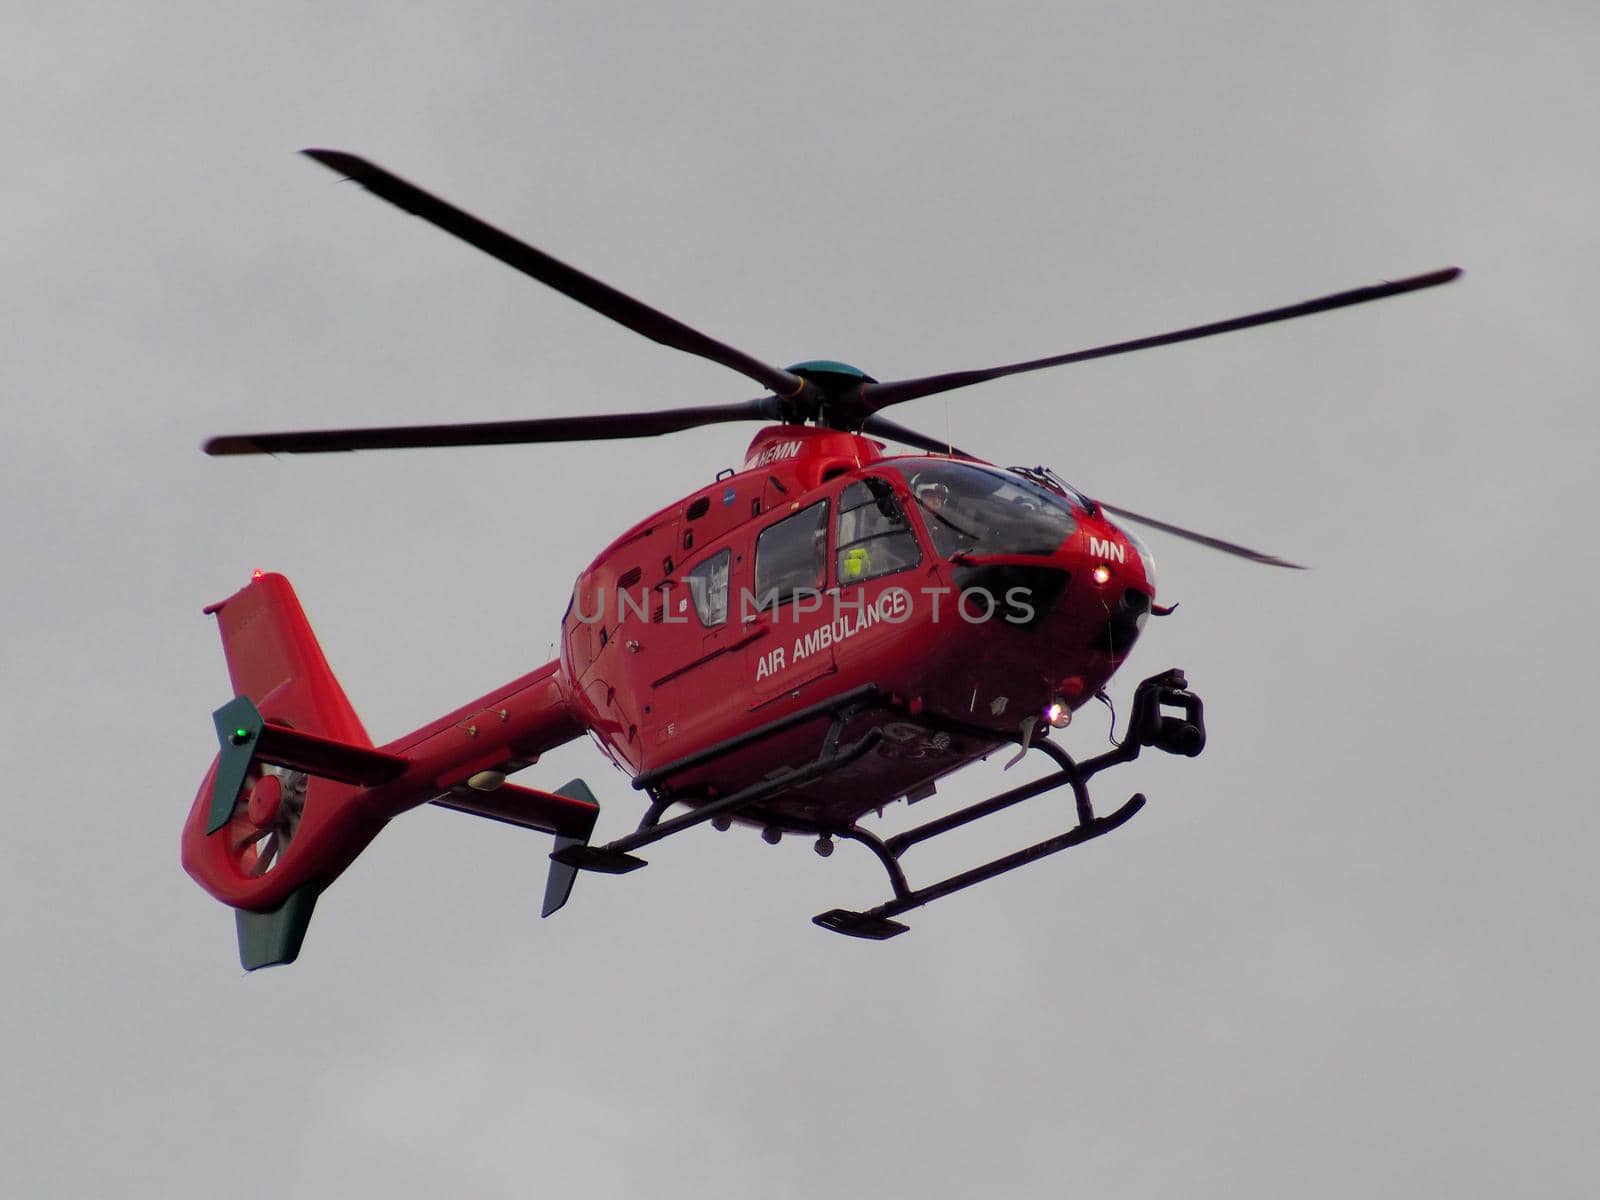 Air Ambulance landing to attend to an emergency by PhilHarland